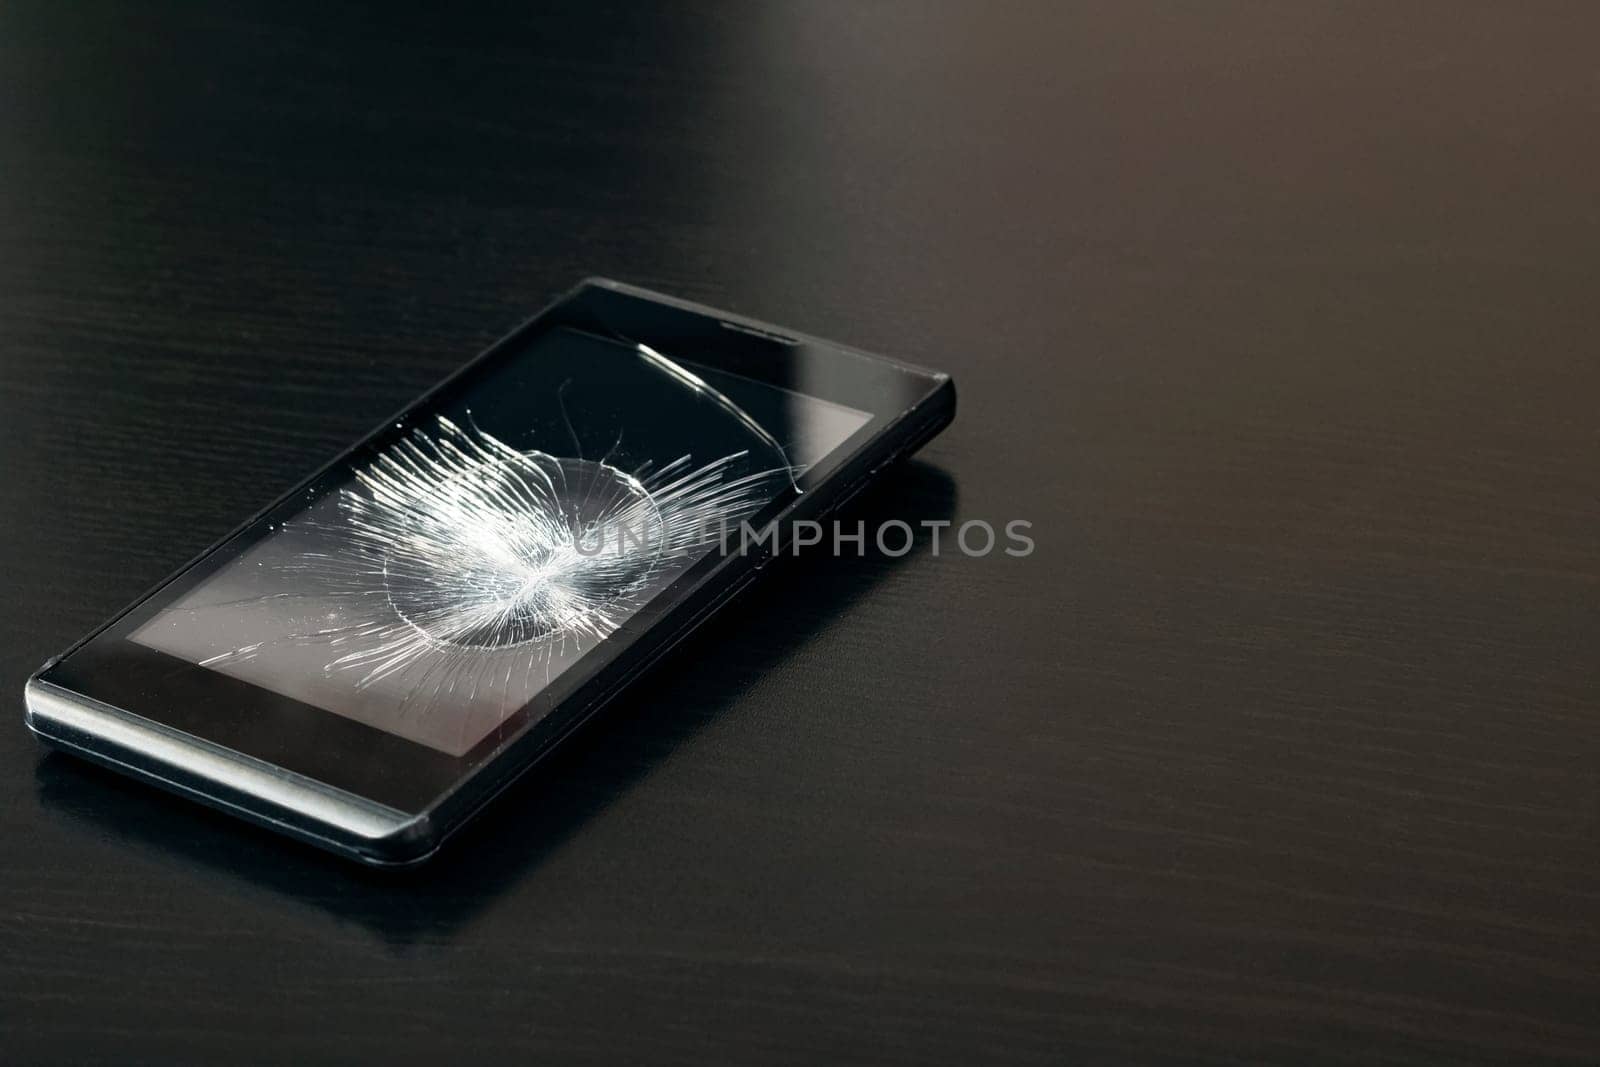 Broken display phone on a black wooden table